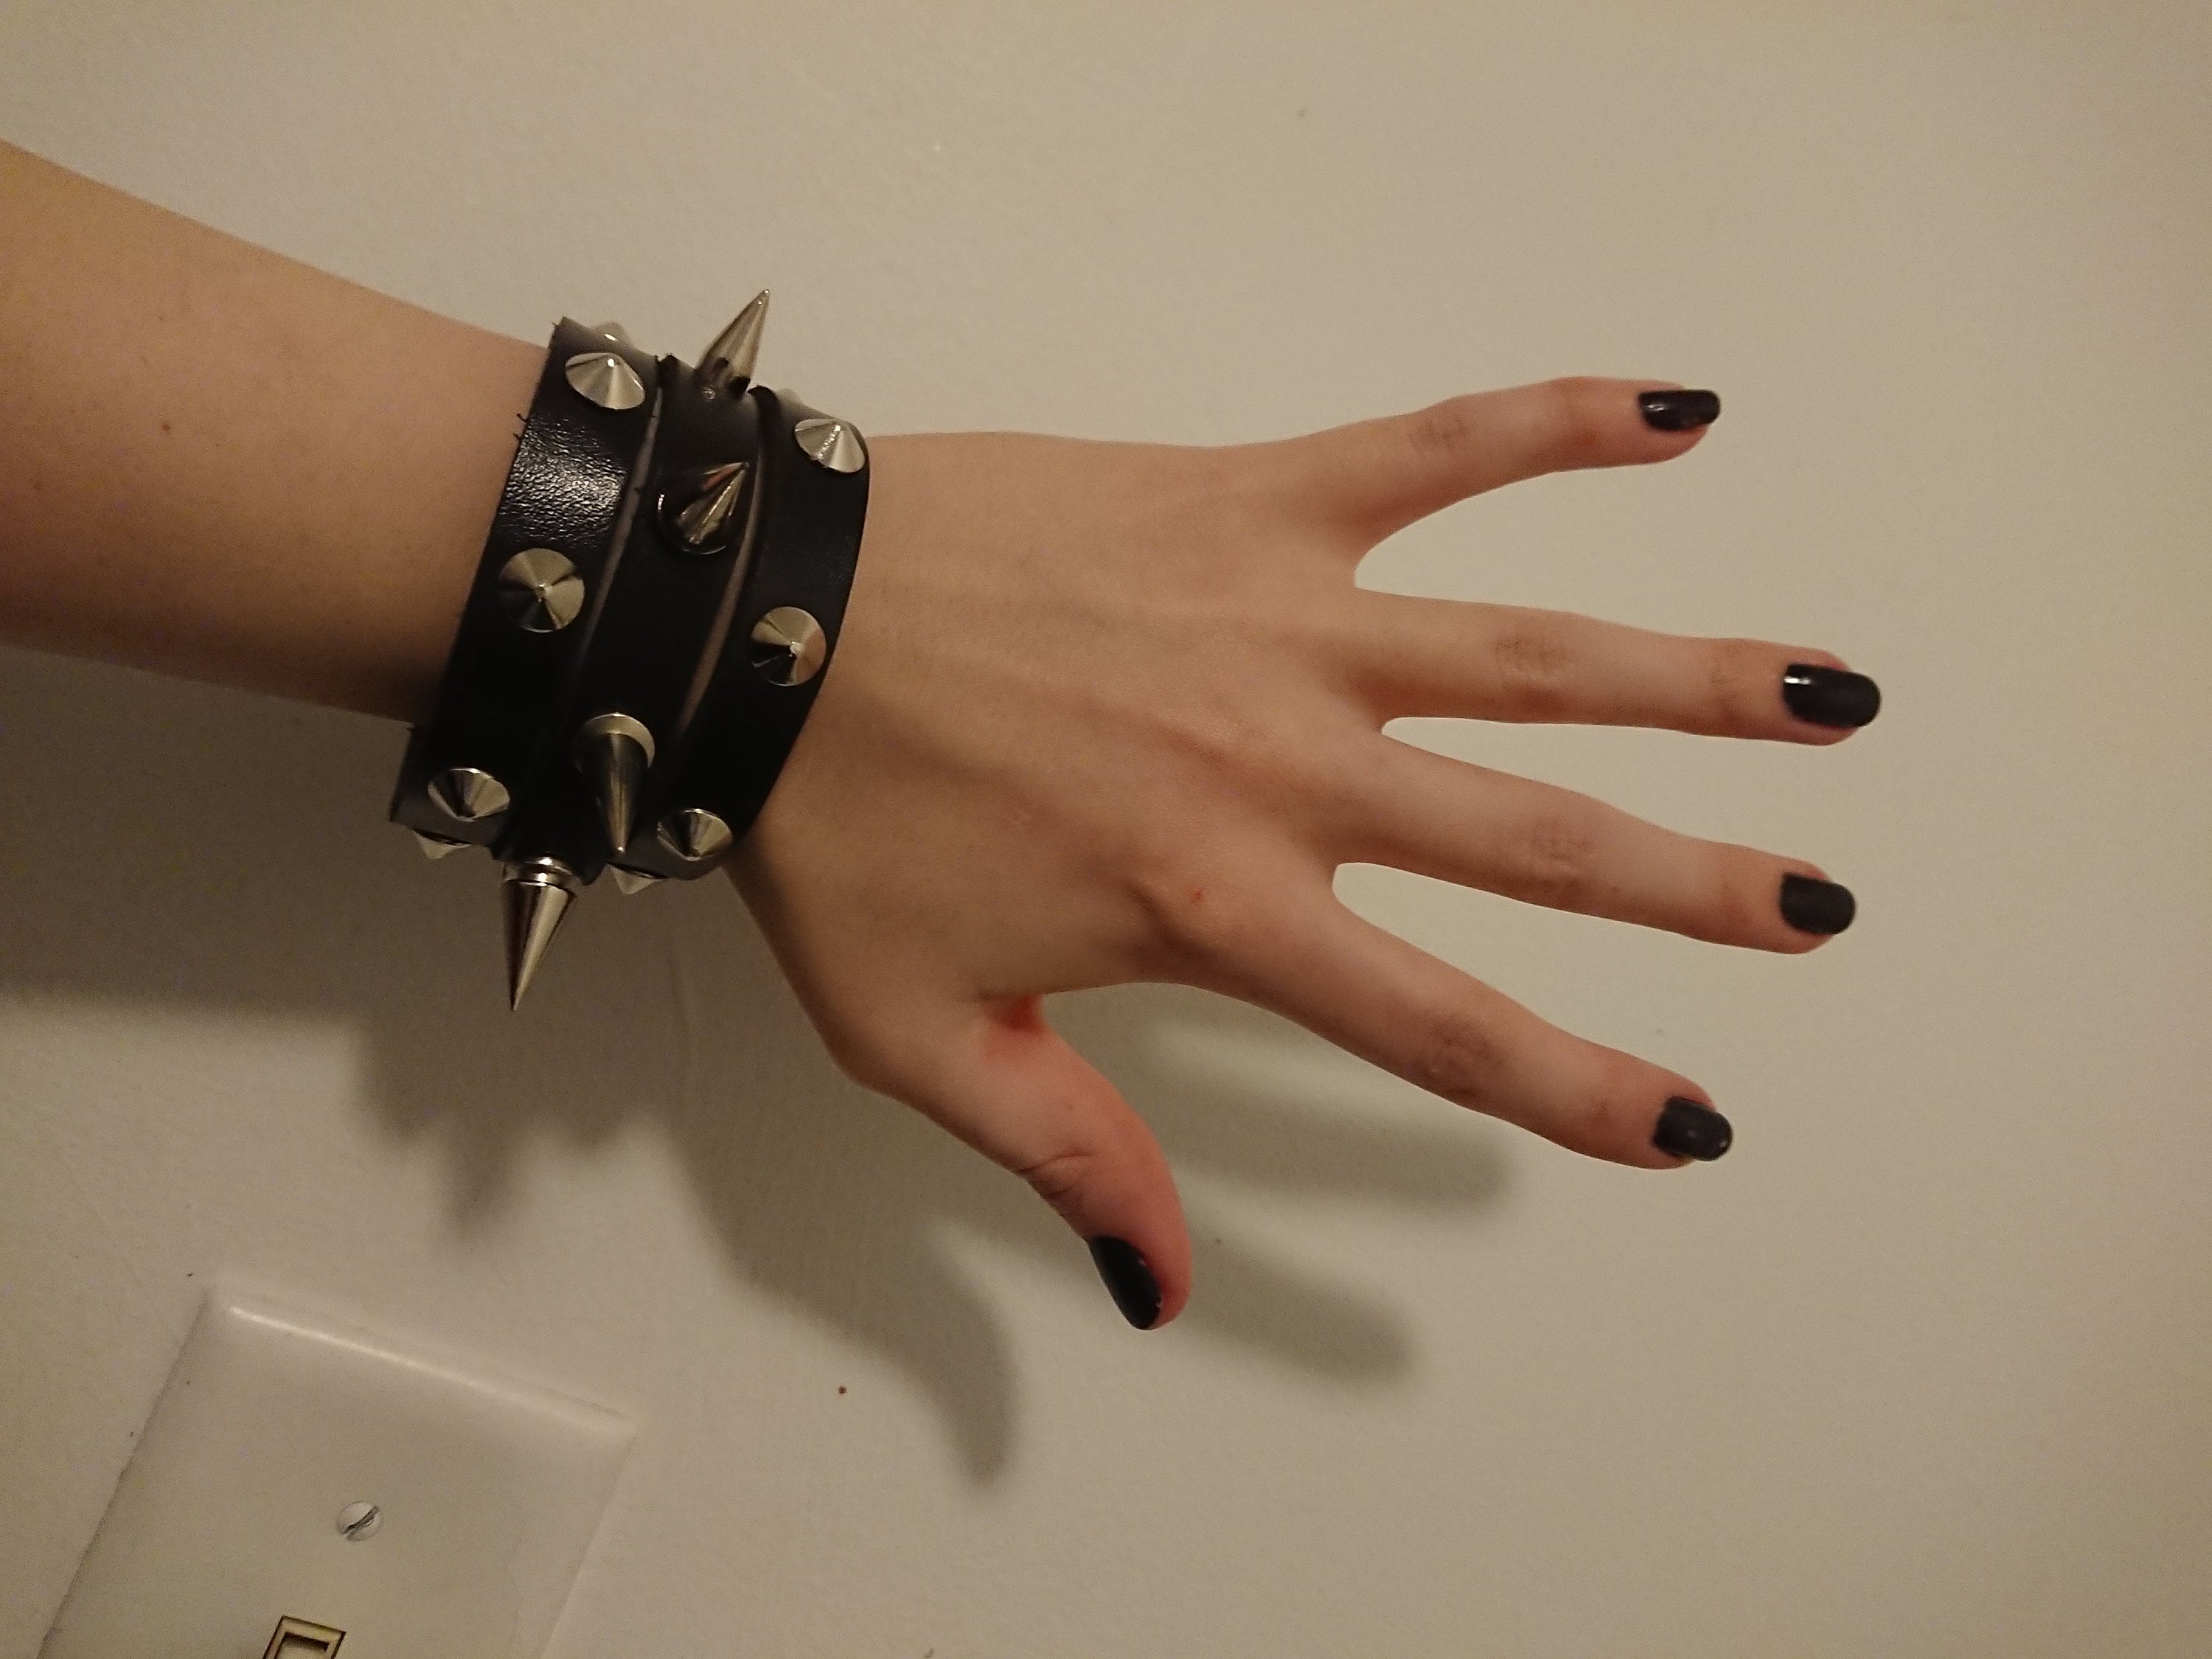 Pair of Spiked Black Leather - Unisex Metal Cuffs, Etsy One Alternative Bracelets, Goth Wrist Gothic 3 in Spikes Punk Emo